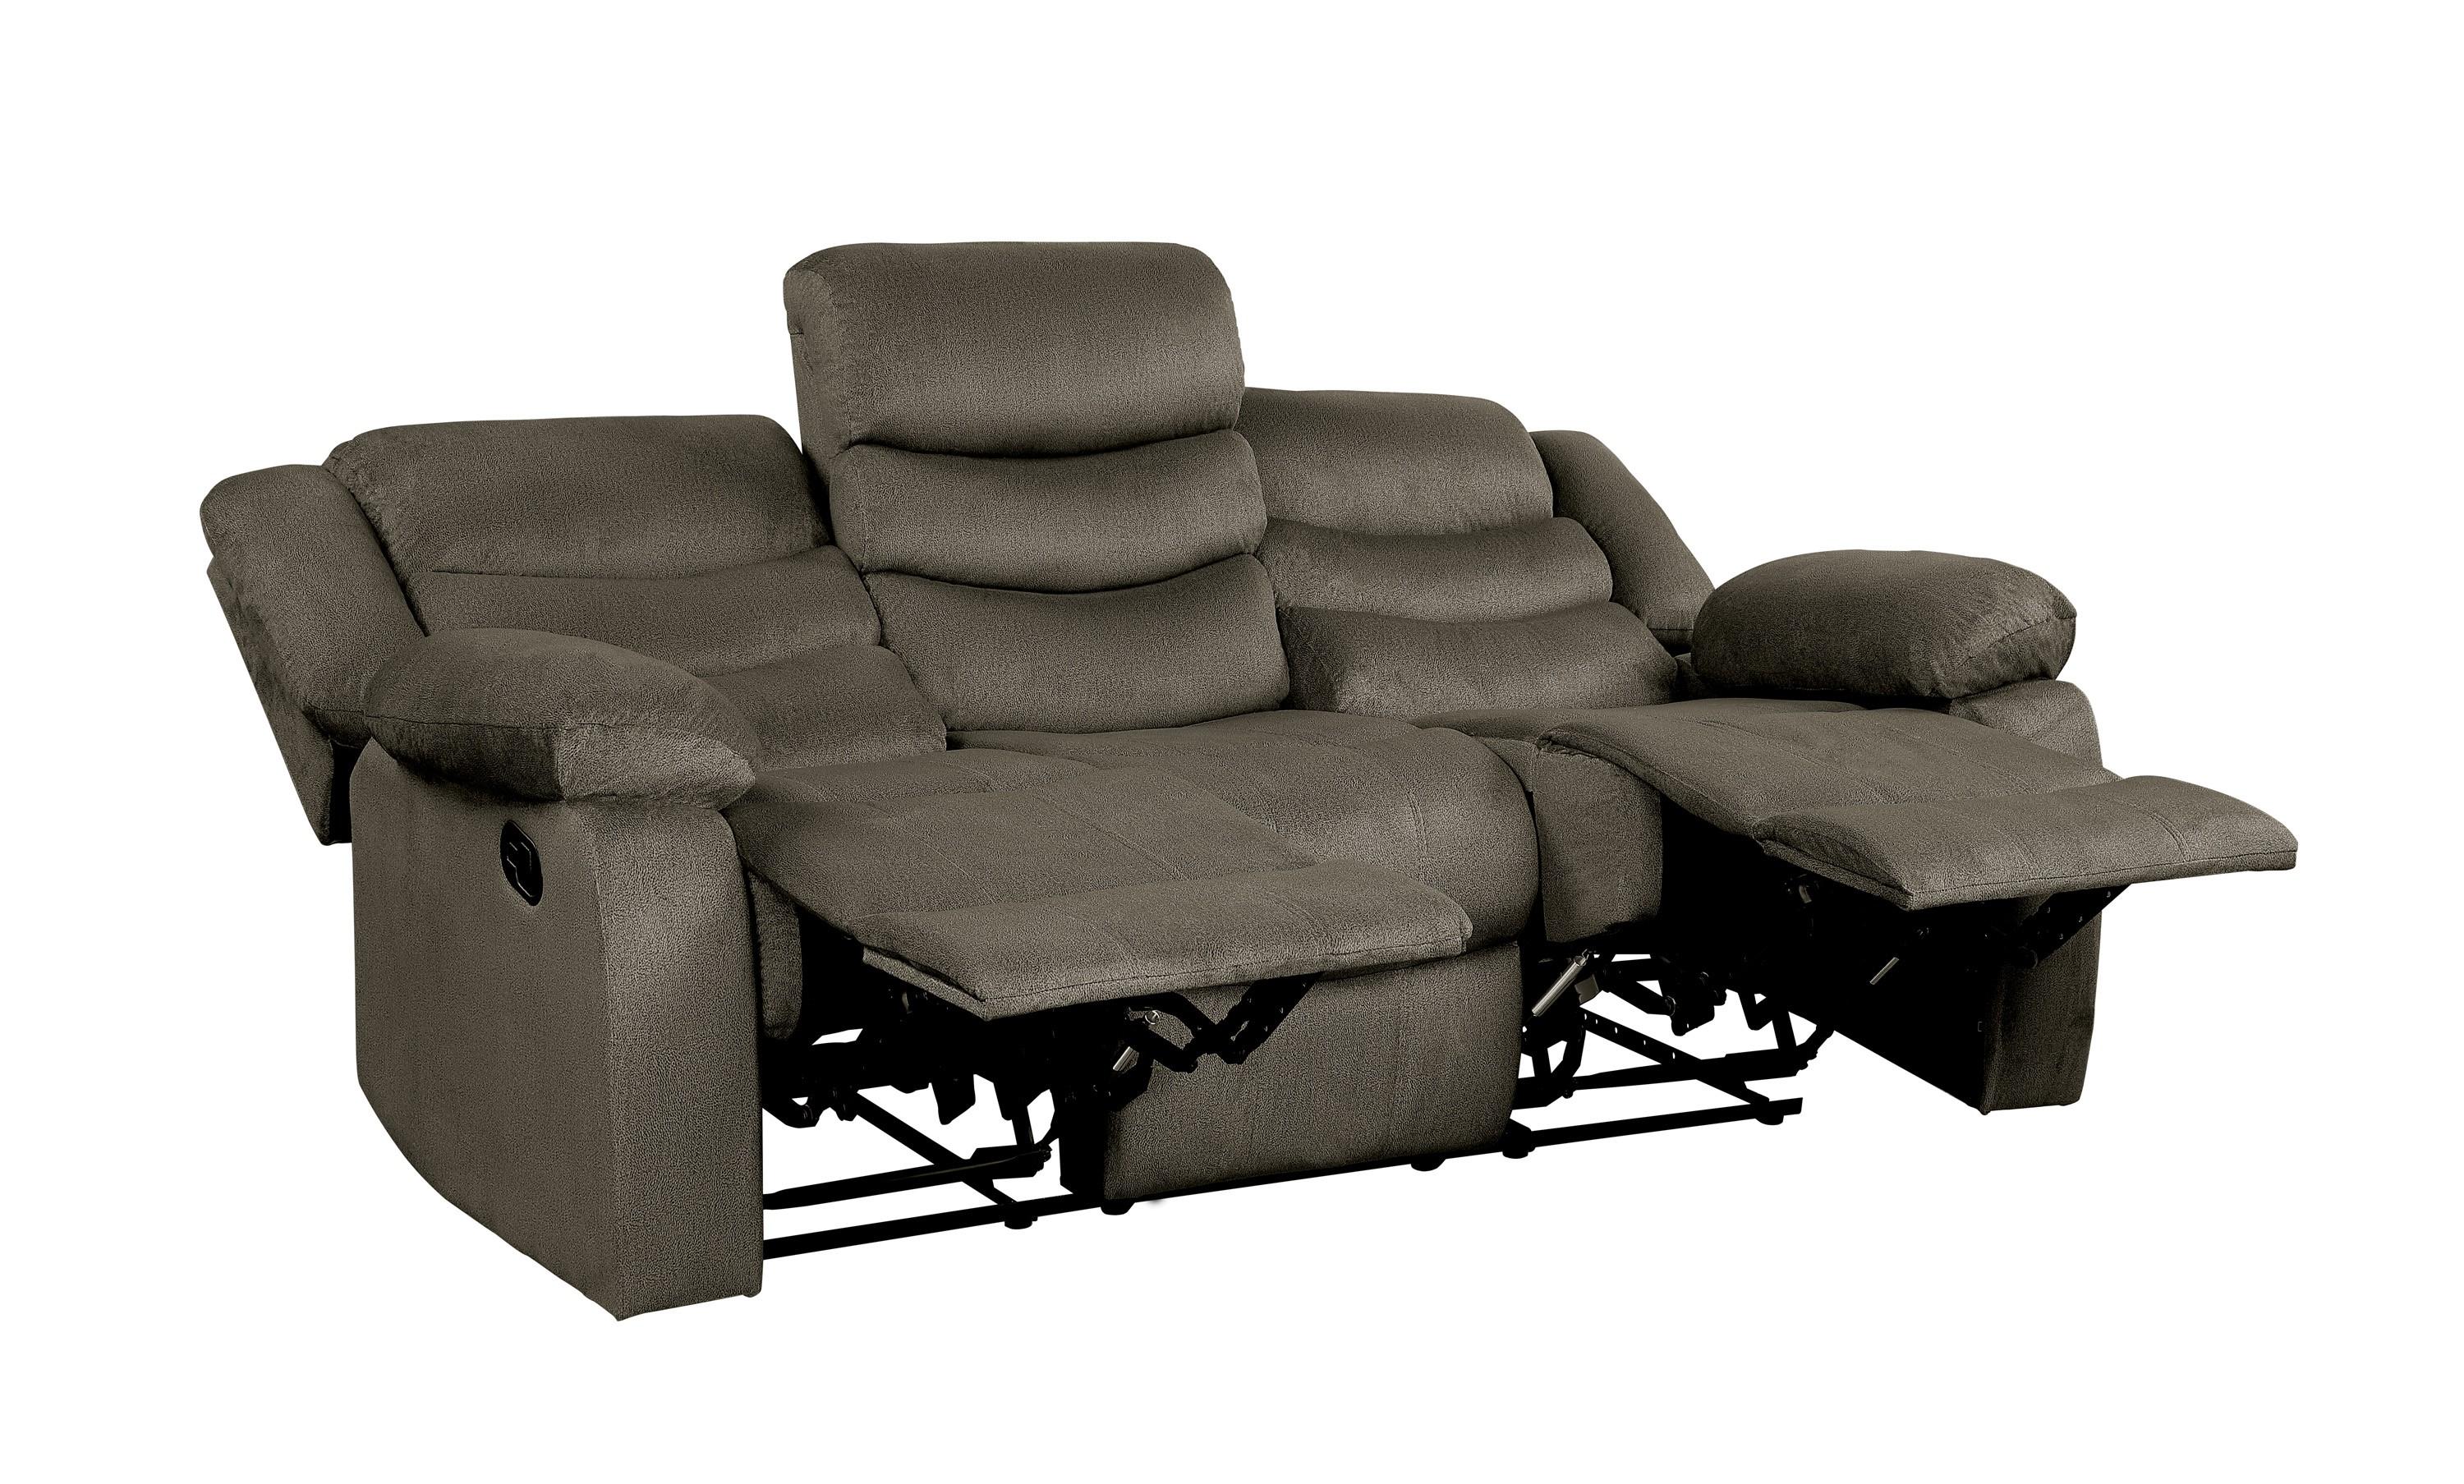 

    
Homelegance 9526BR-3 Discus Reclining Sofa Brown 9526BR-3
